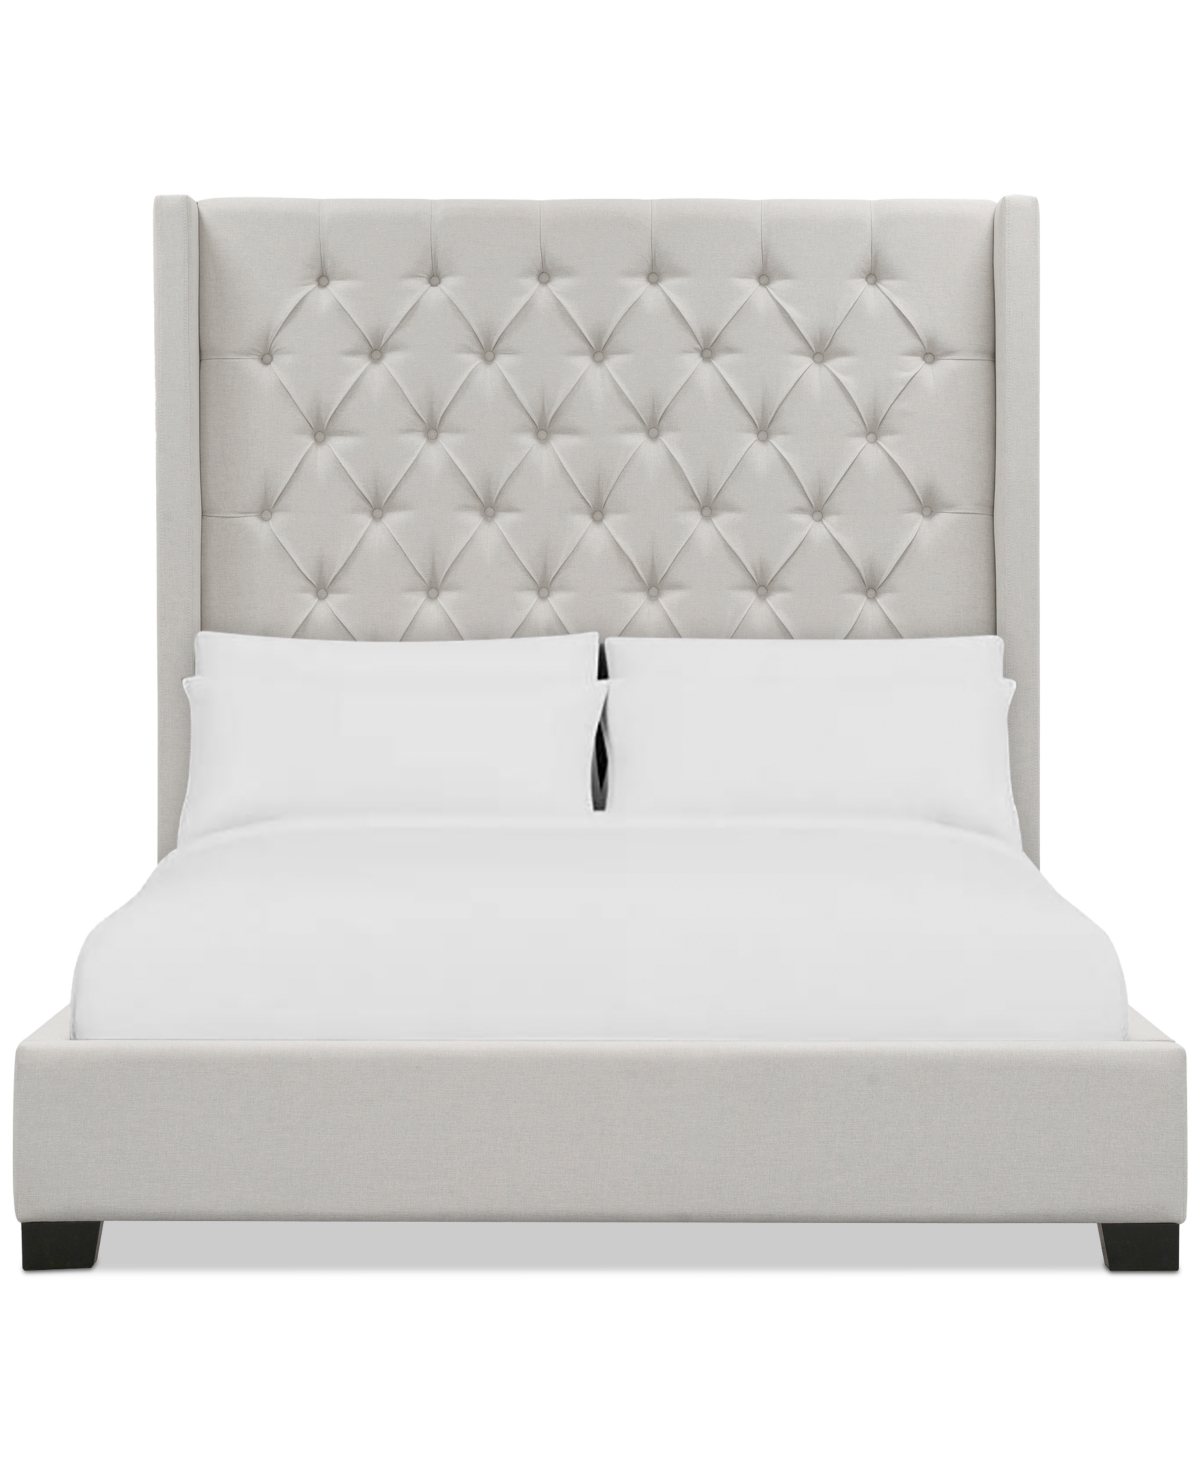 Macy's Thorstein California King Bed In Neutral